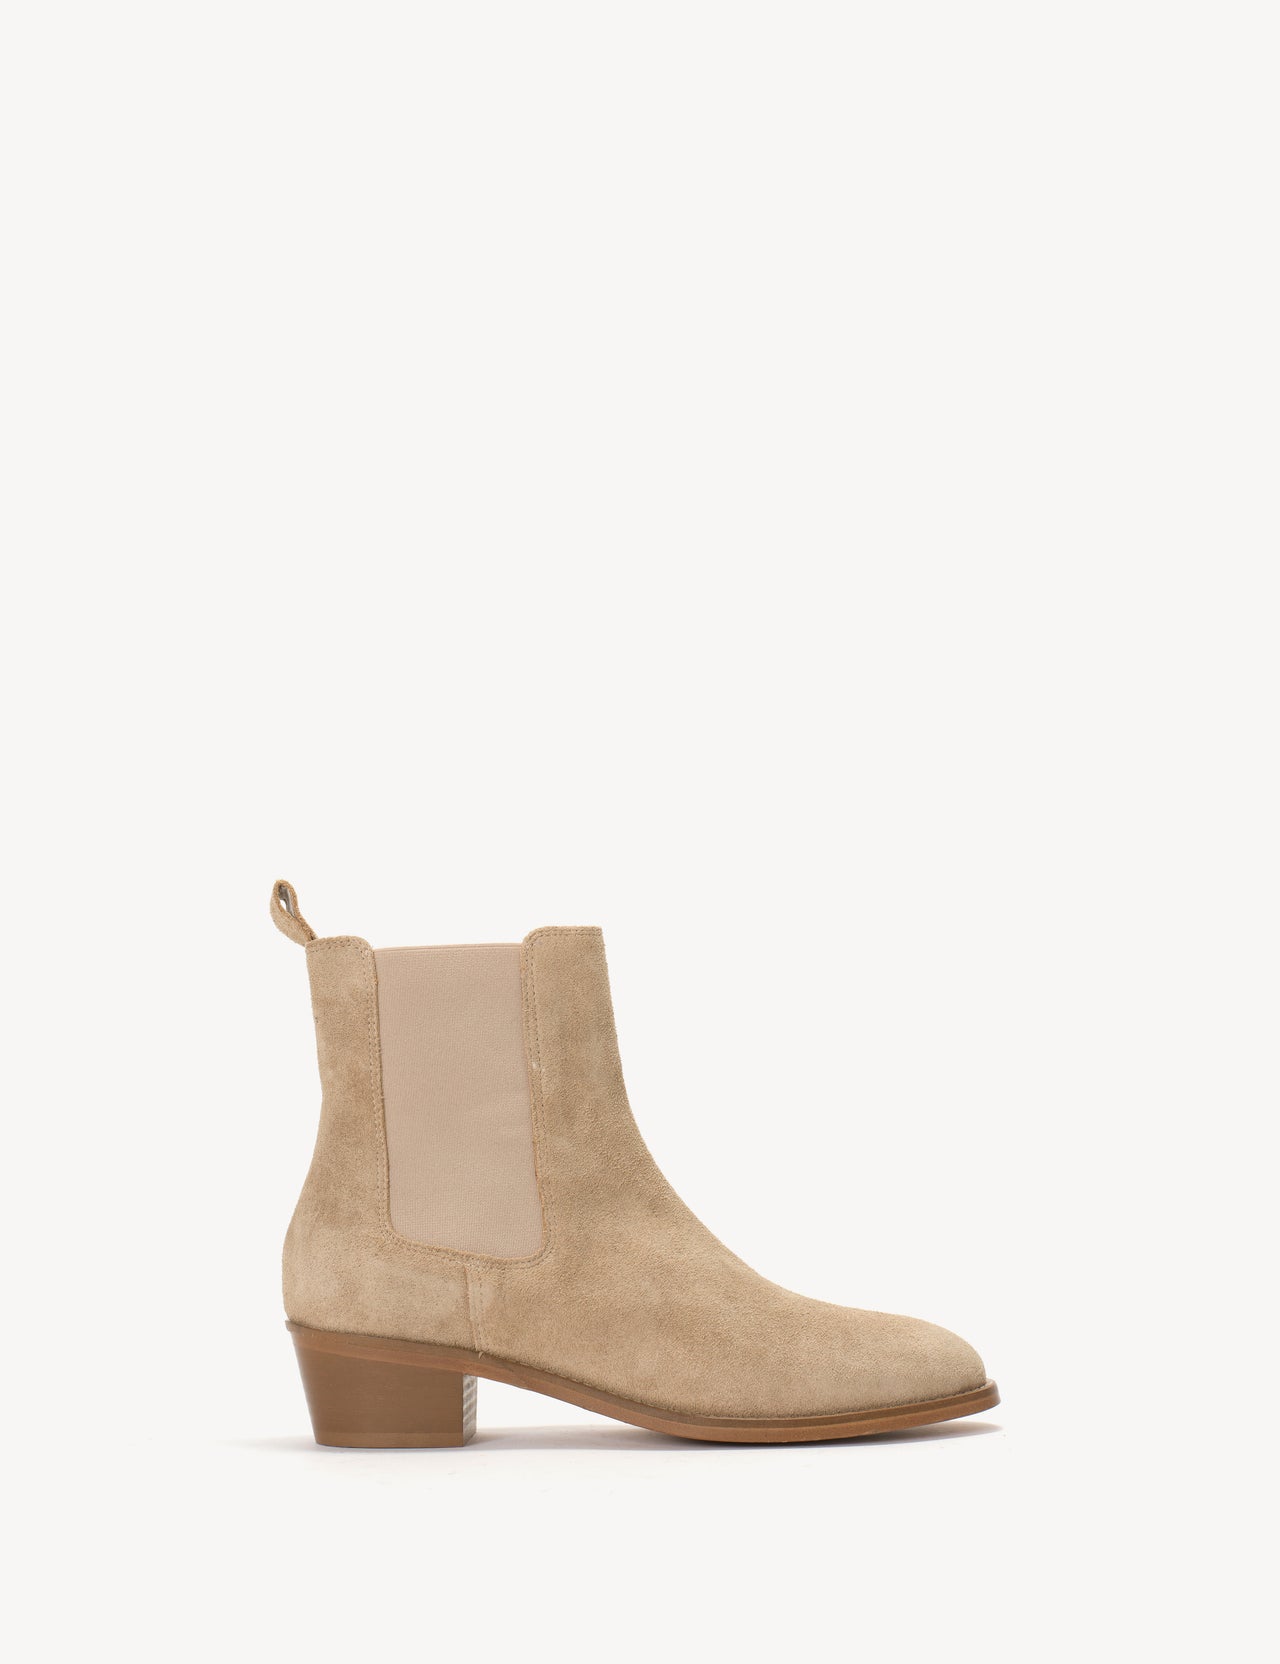 Celina Chelsea Boot In Stone Calf Suede